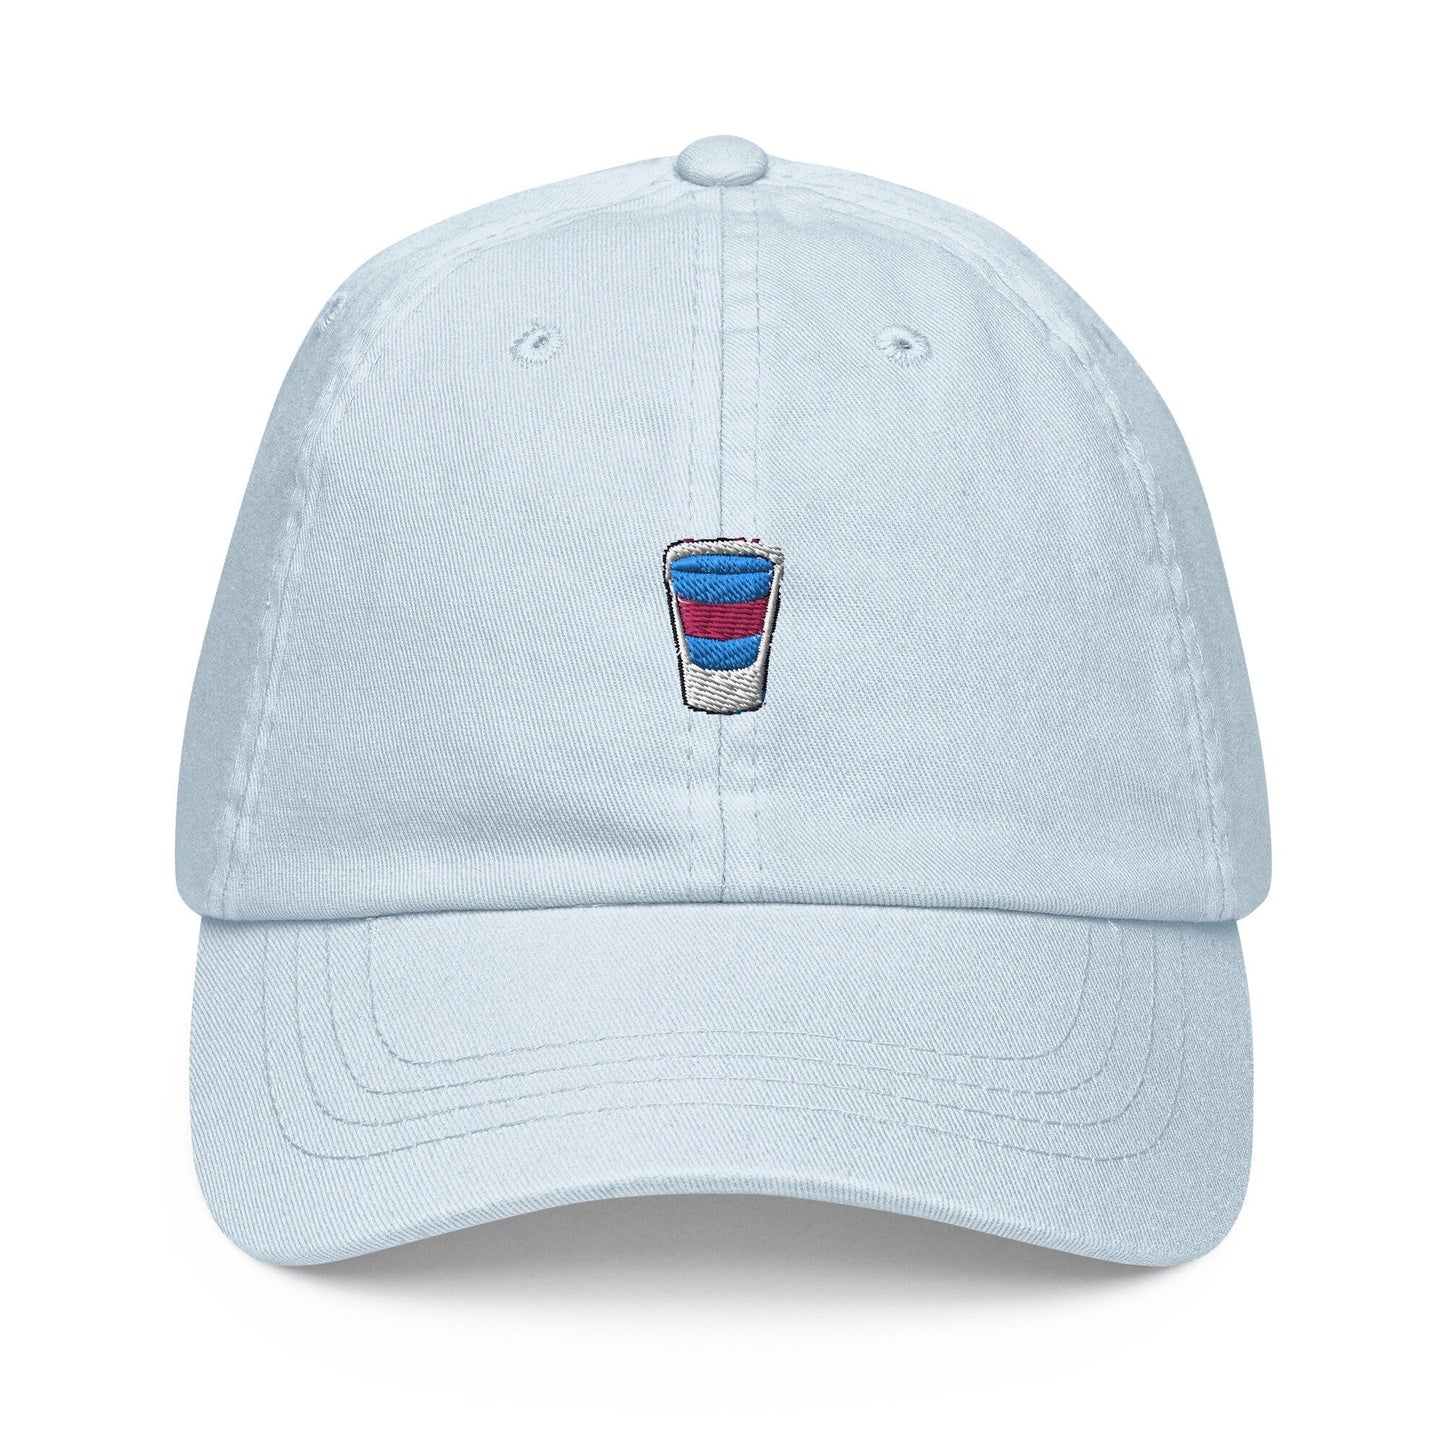 Pornstar Shot Dad Hat - Gift for Mexican Spirit Lovers and Party Goers - Pastel Cotton Embroidered Cap - Evilwater Originals